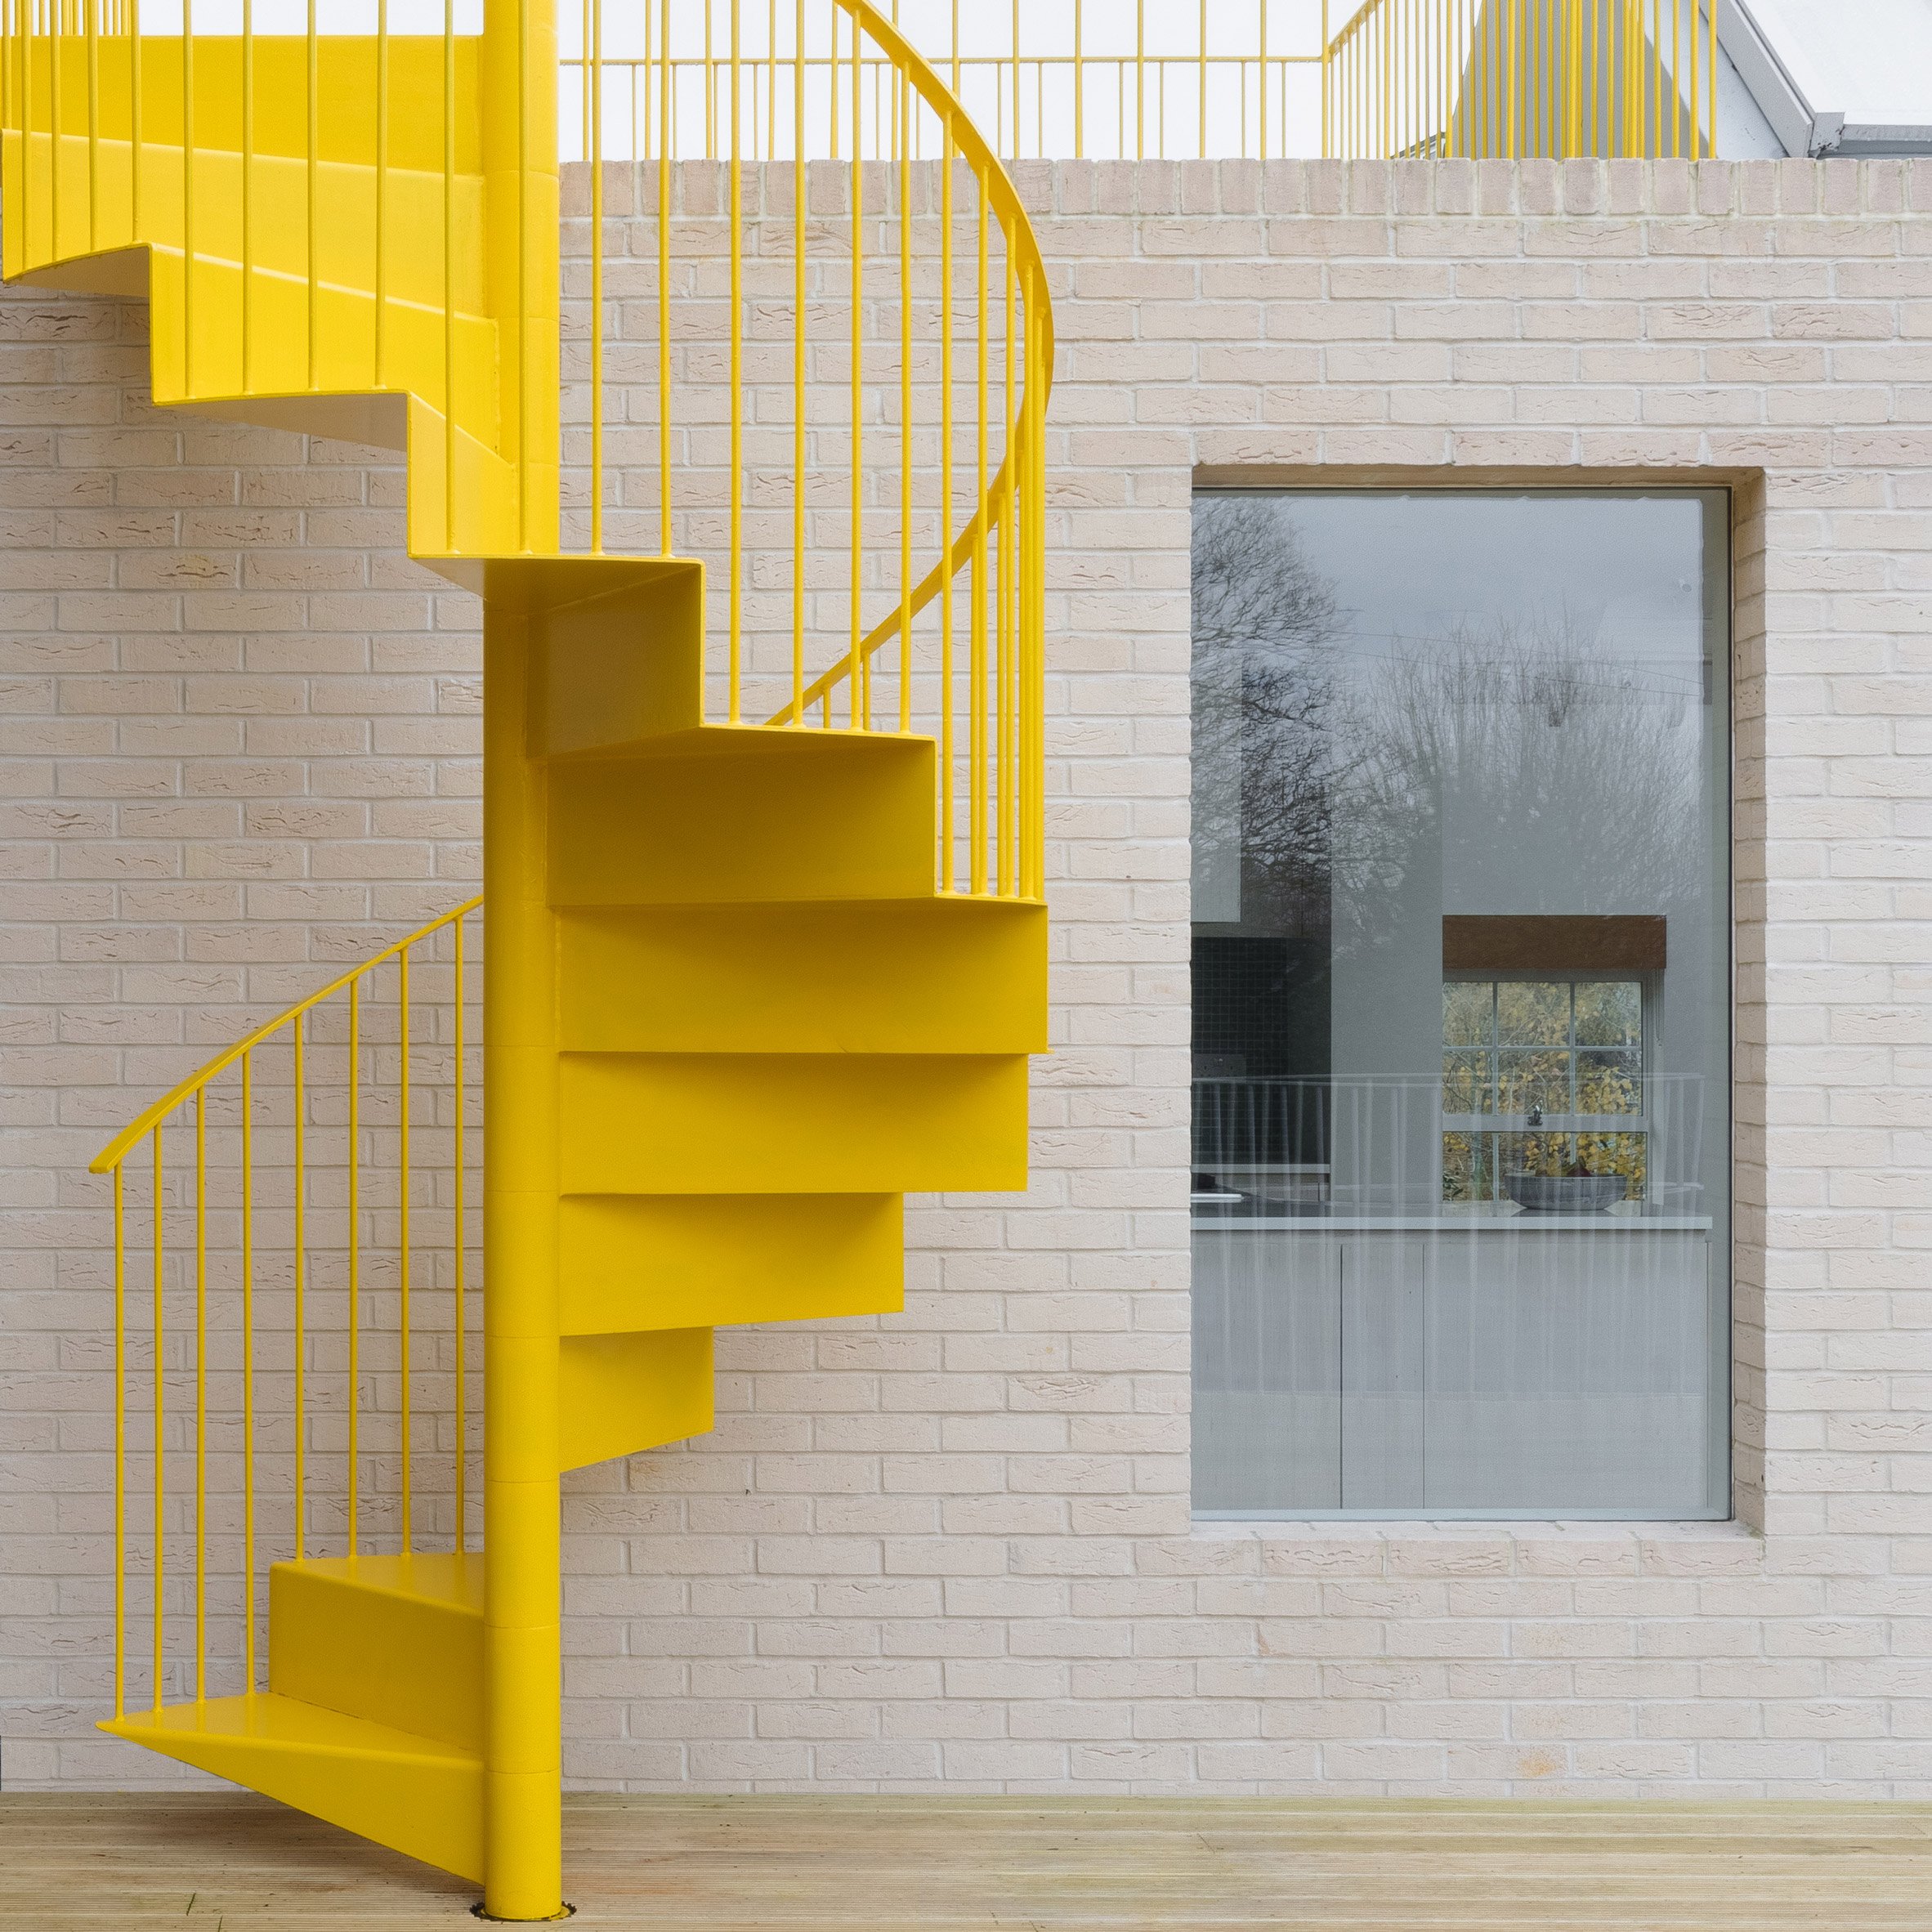 Dezeen's top 10 staircases of 2019: Mile End Road, England, Vine Architecture Studio